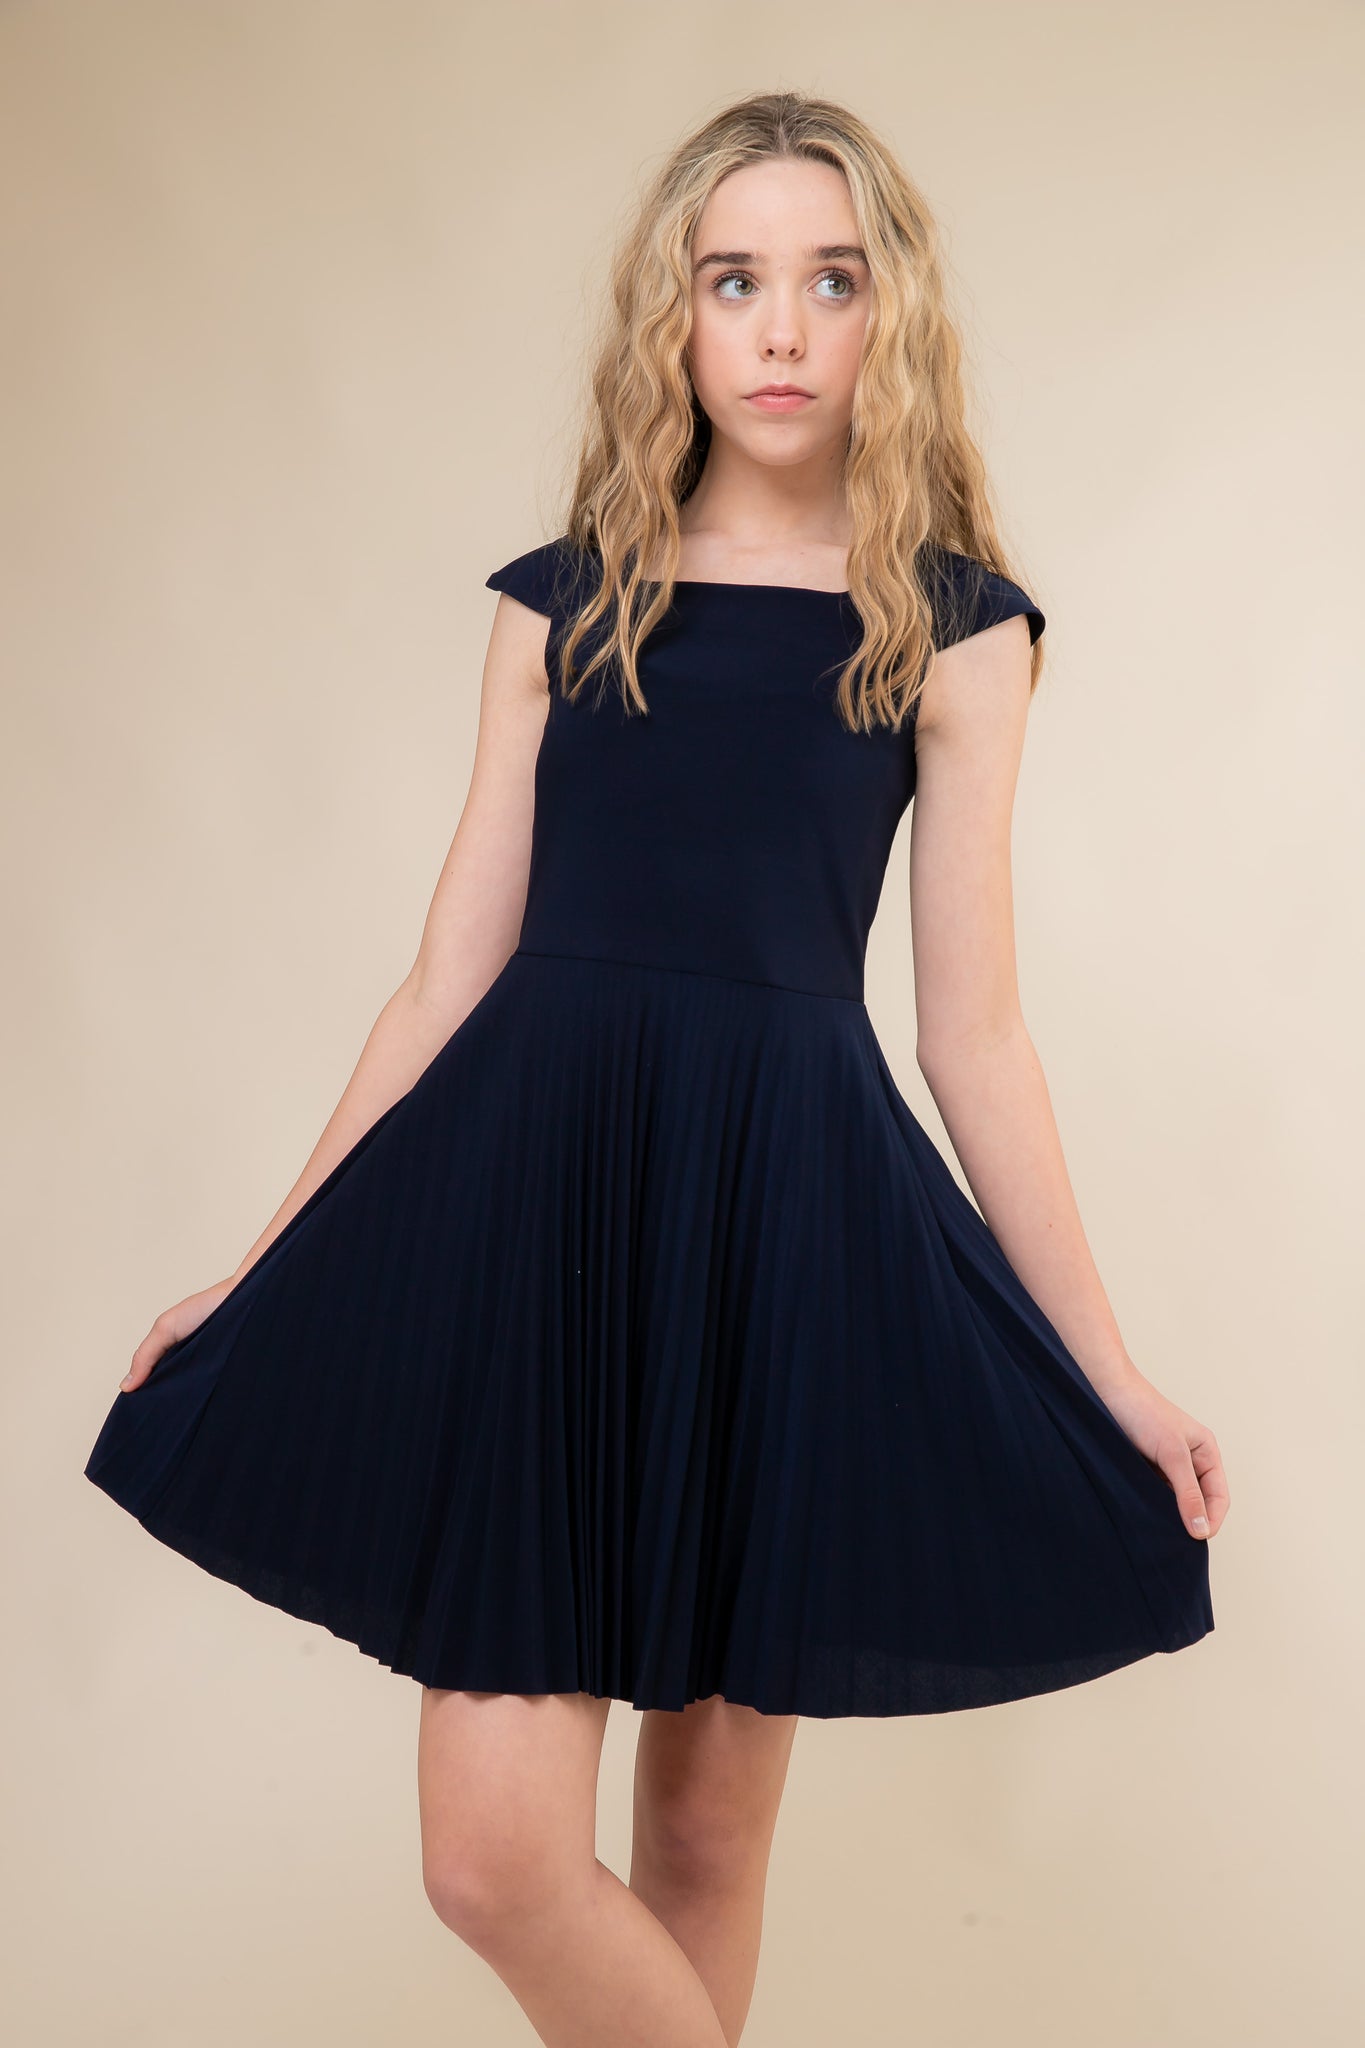 Cap sleeve pleated skirt in navy with all over stretch fabric, cap sleeve detailing for shoulder coverage and hits above the knee.